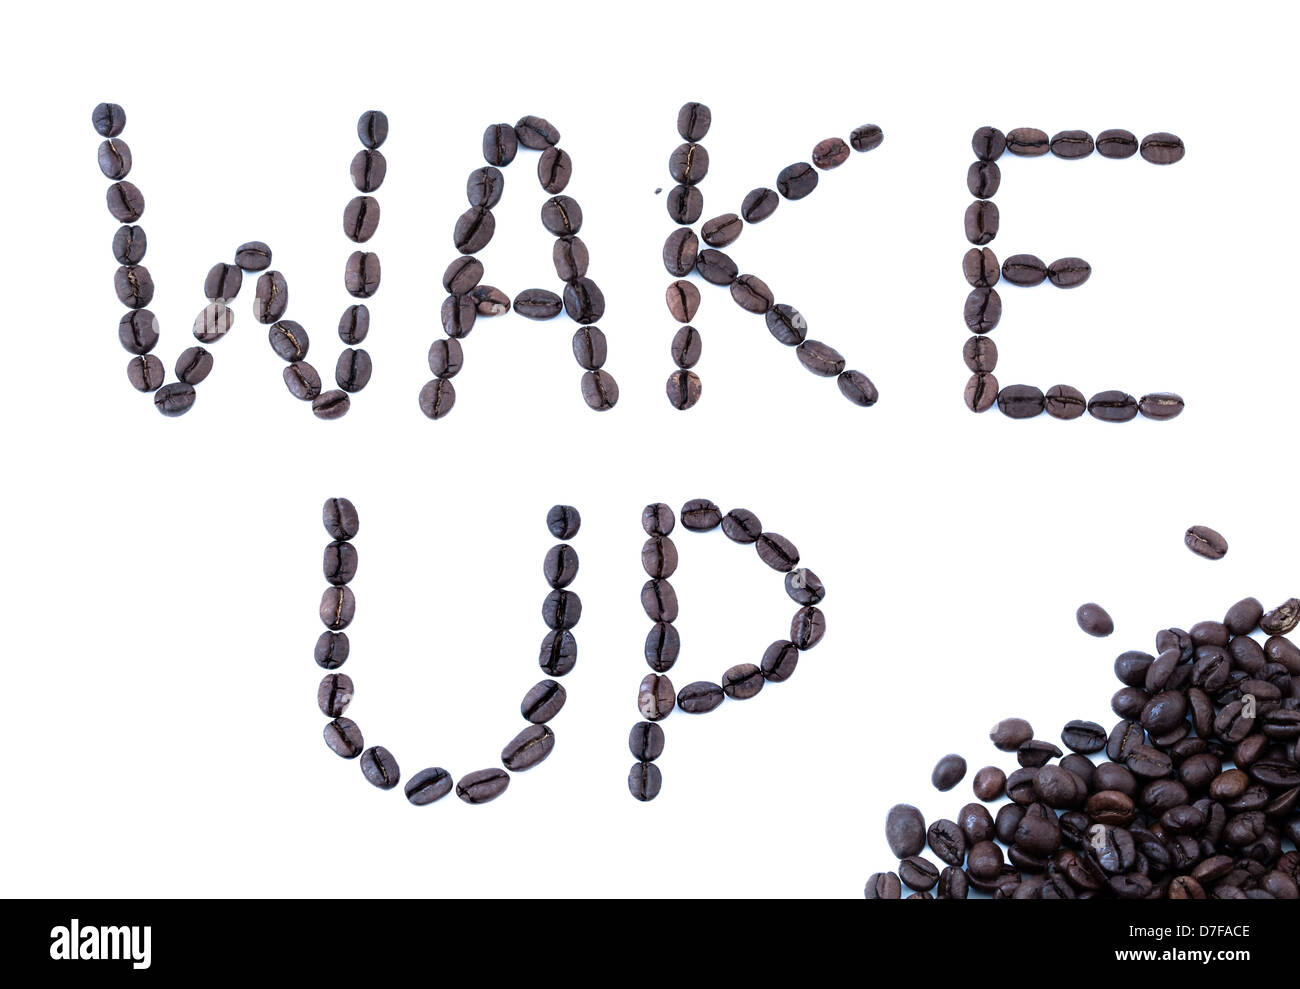 The phrase 'Wake Up' written with coffee beans. Stock Photo